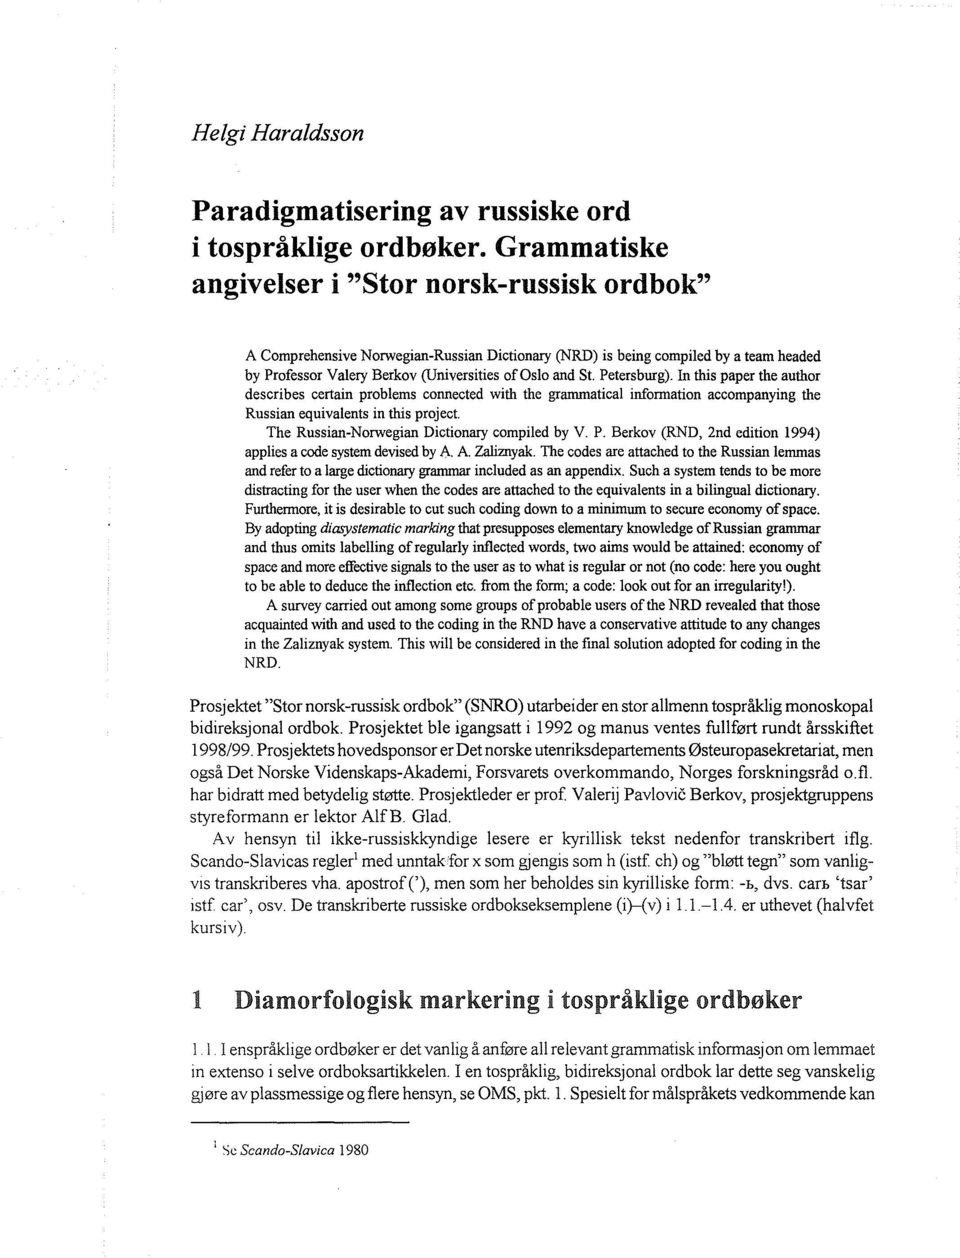 Petersburg). In this paper the author describes certain problems connected with the granunatical information accompanying the Russian equivalents in this project.